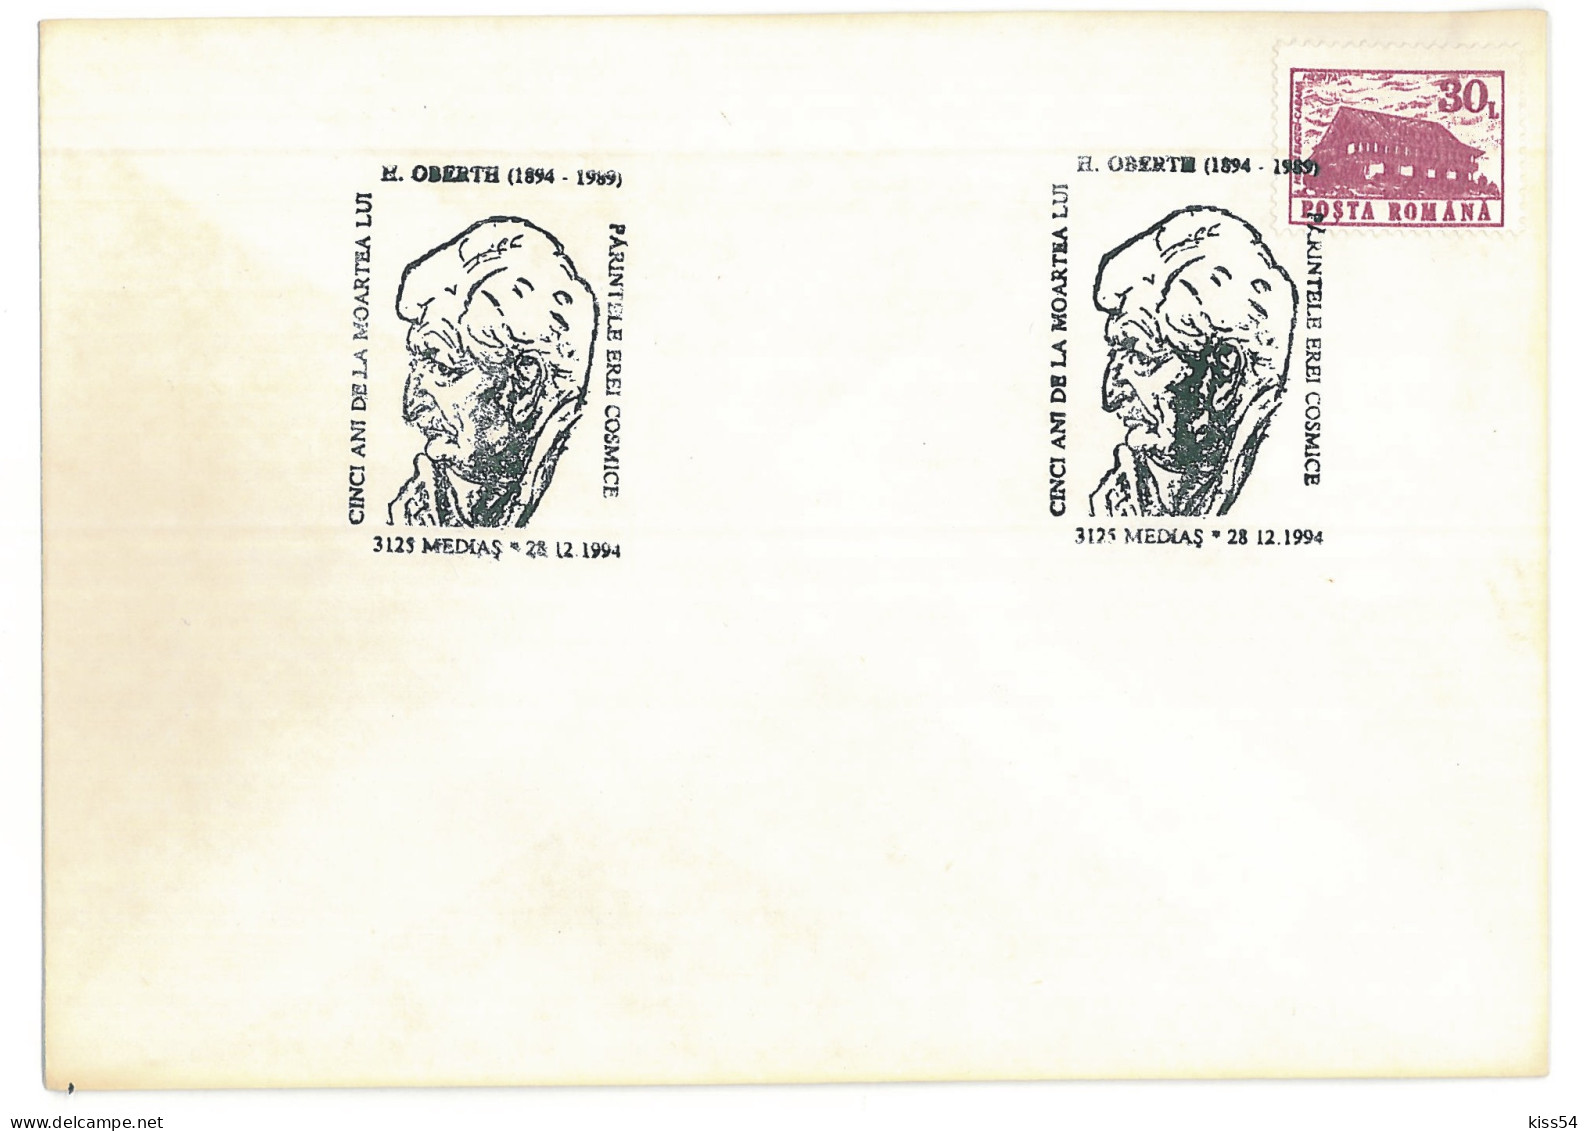 COV 61 - 400 Hermann OBERTH, Romania - Cover - Used - 1994 - Lettres & Documents